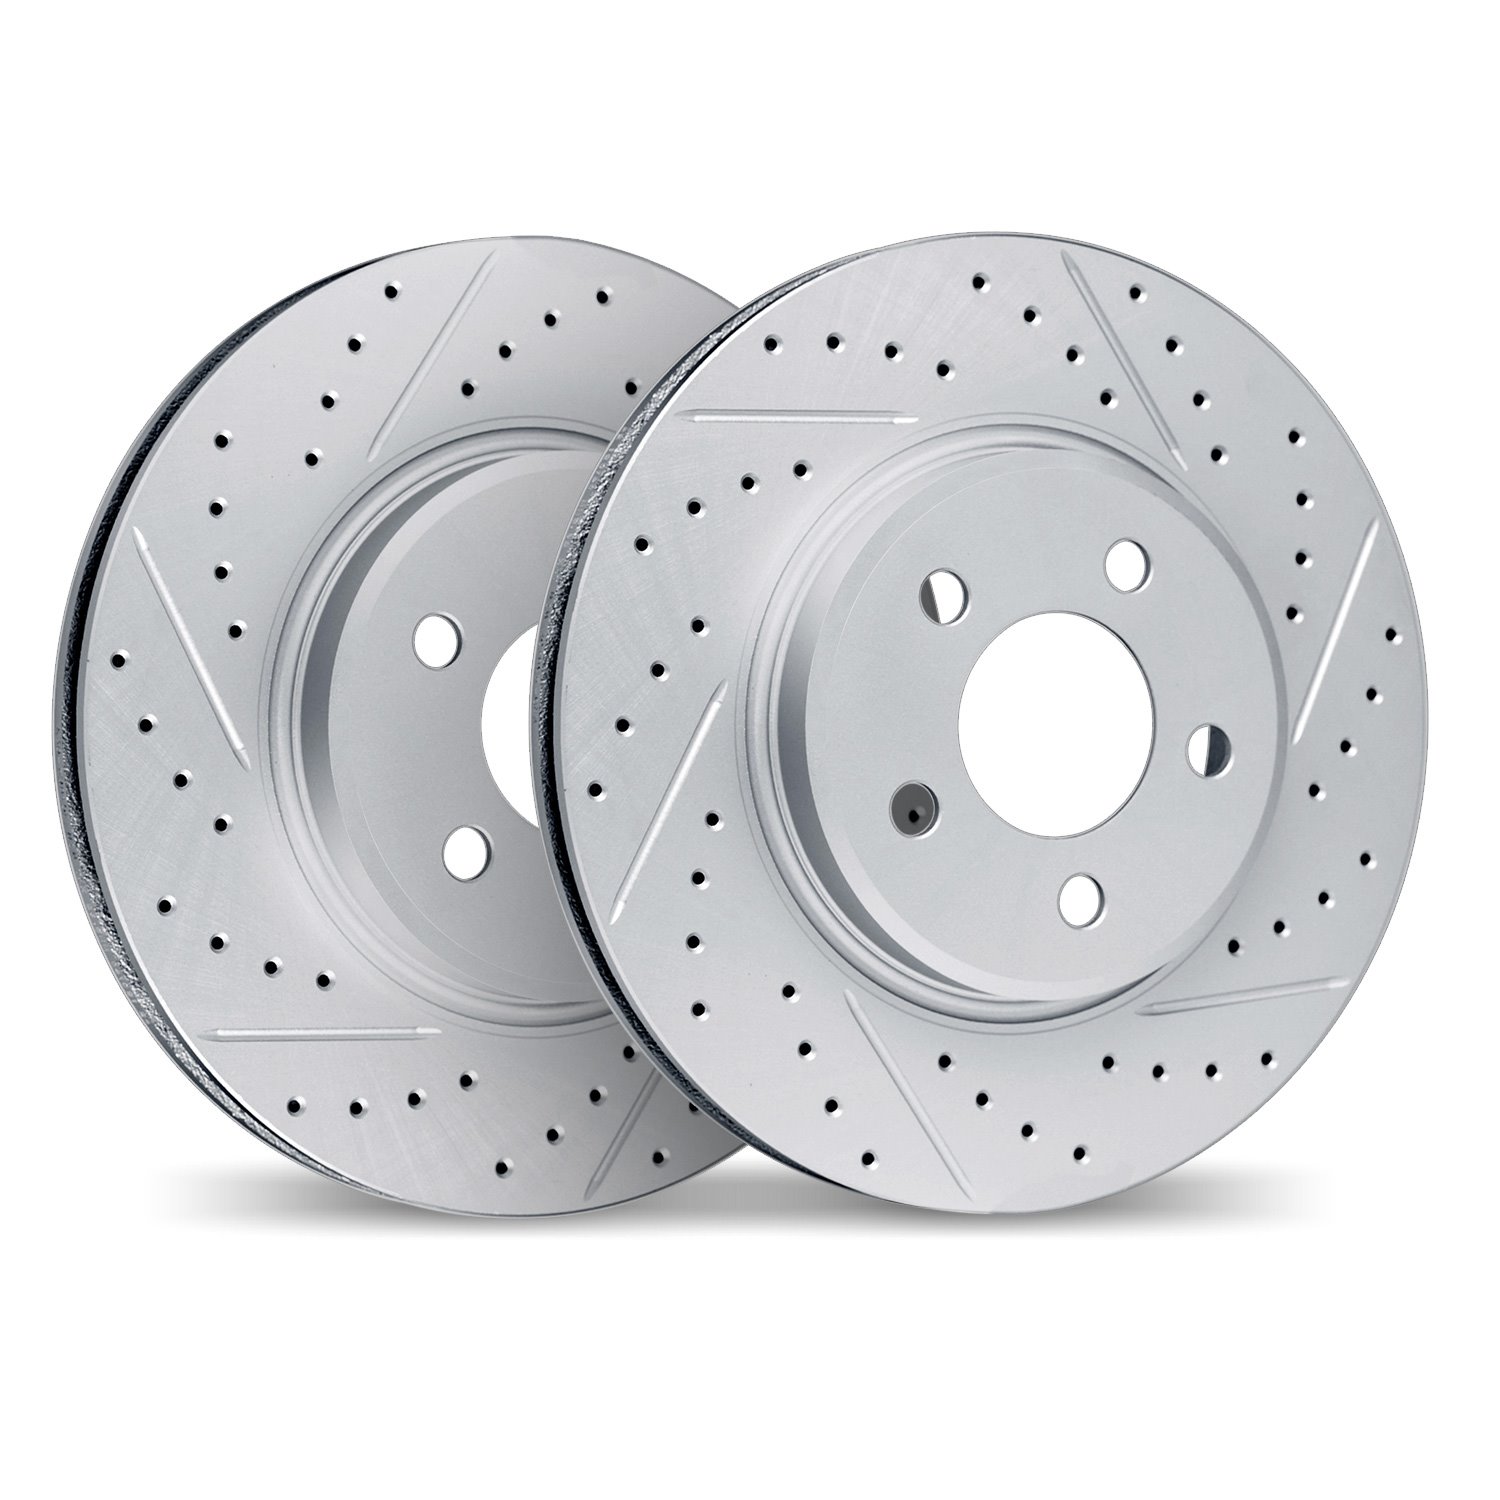 2002-48015 Geoperformance Drilled/Slotted Brake Rotors, 1992-2002 GM, Position: Front